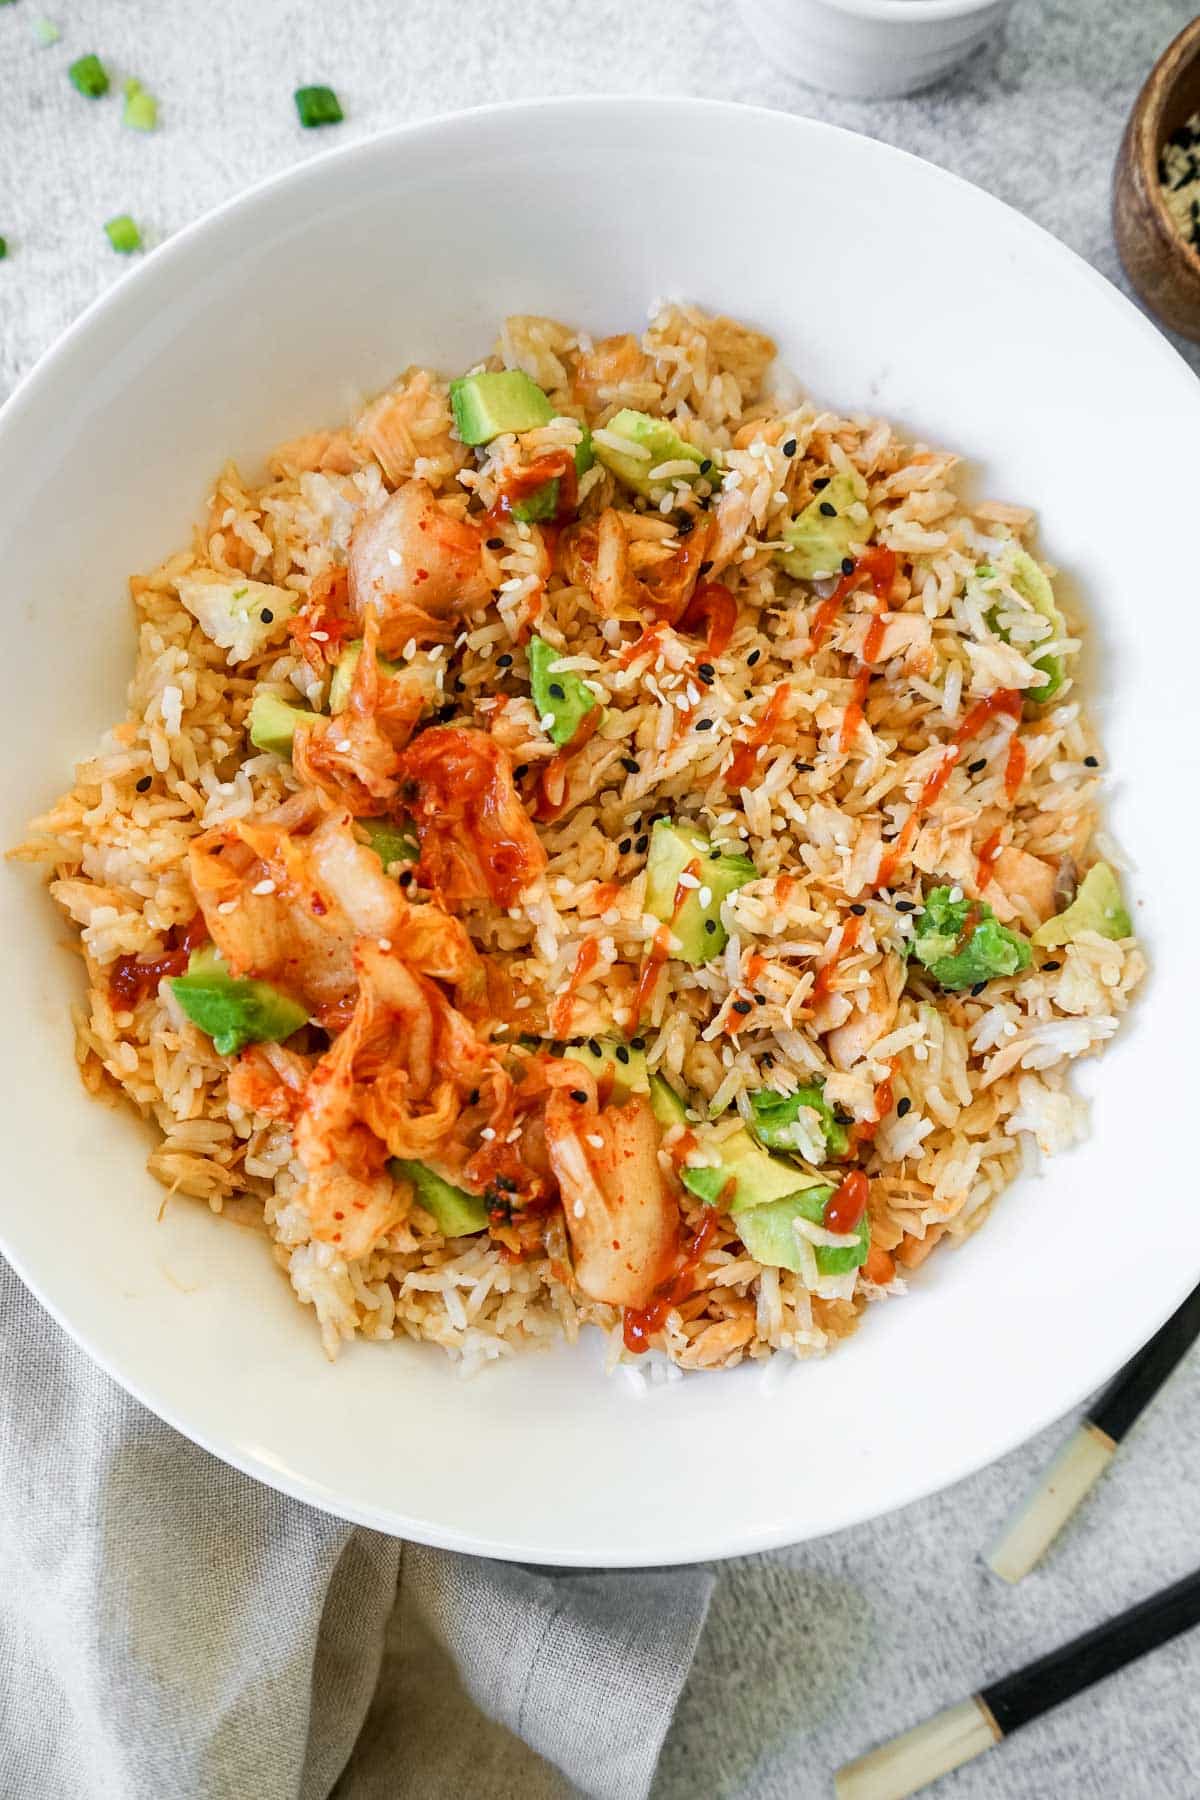 Tik Tok Salmon and Rice in a white bowl with kimchee and chop sticks.